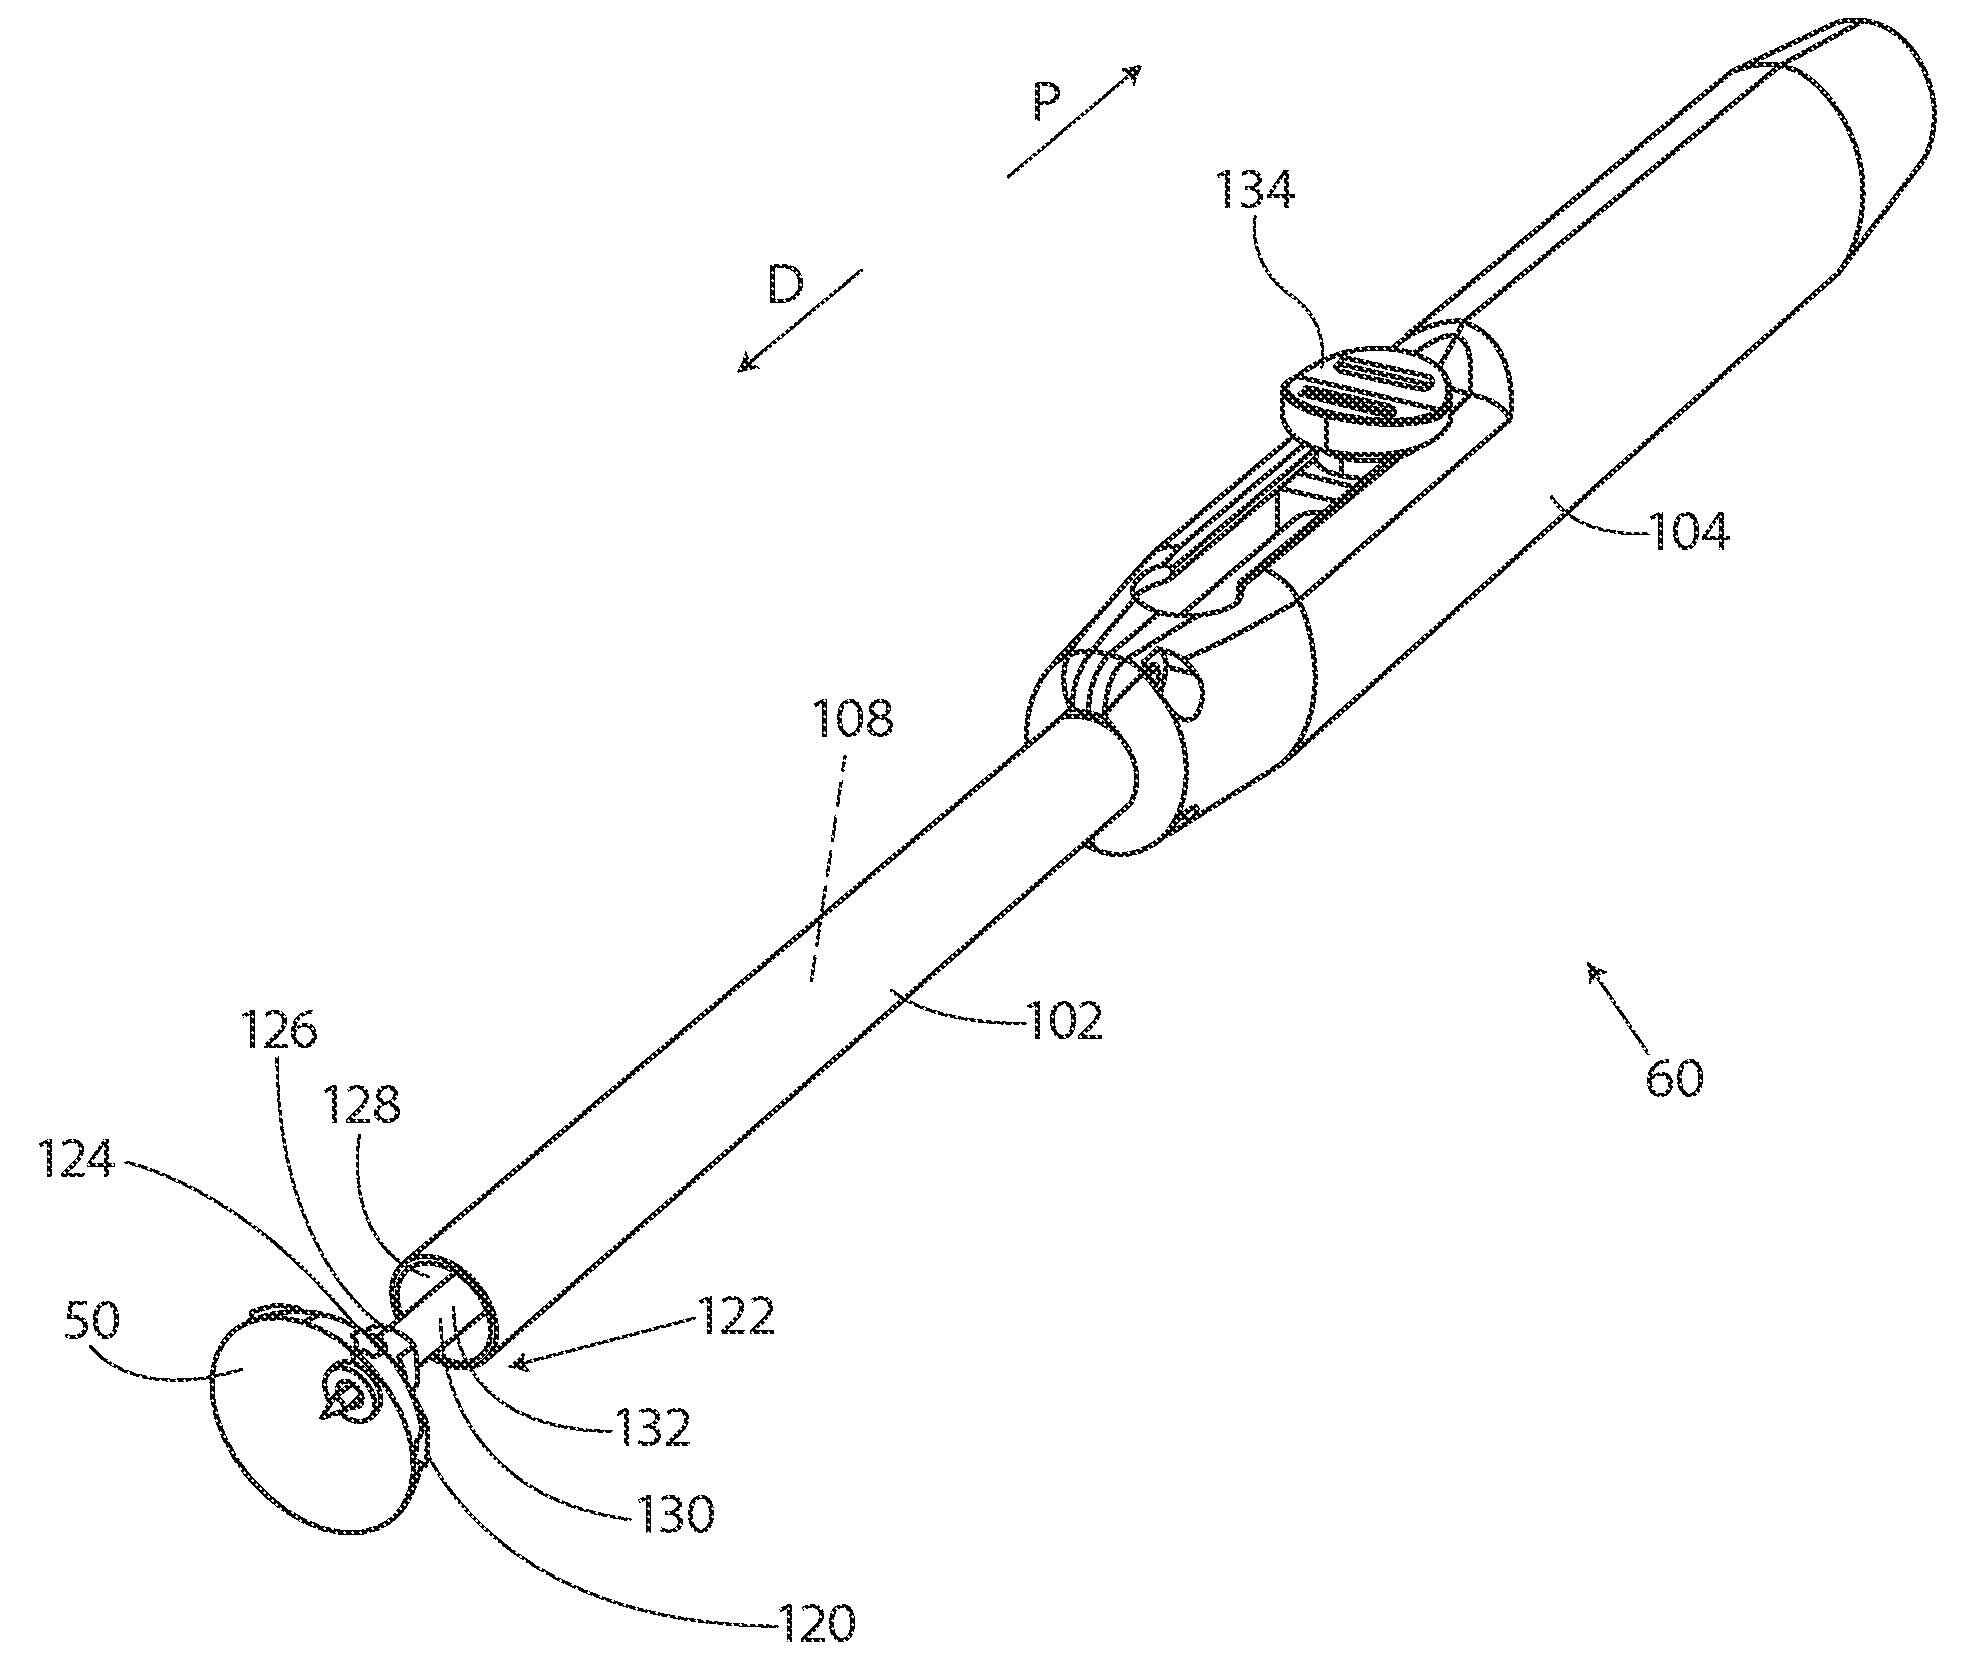 Methods and apparatus for deploying sheet-like materials